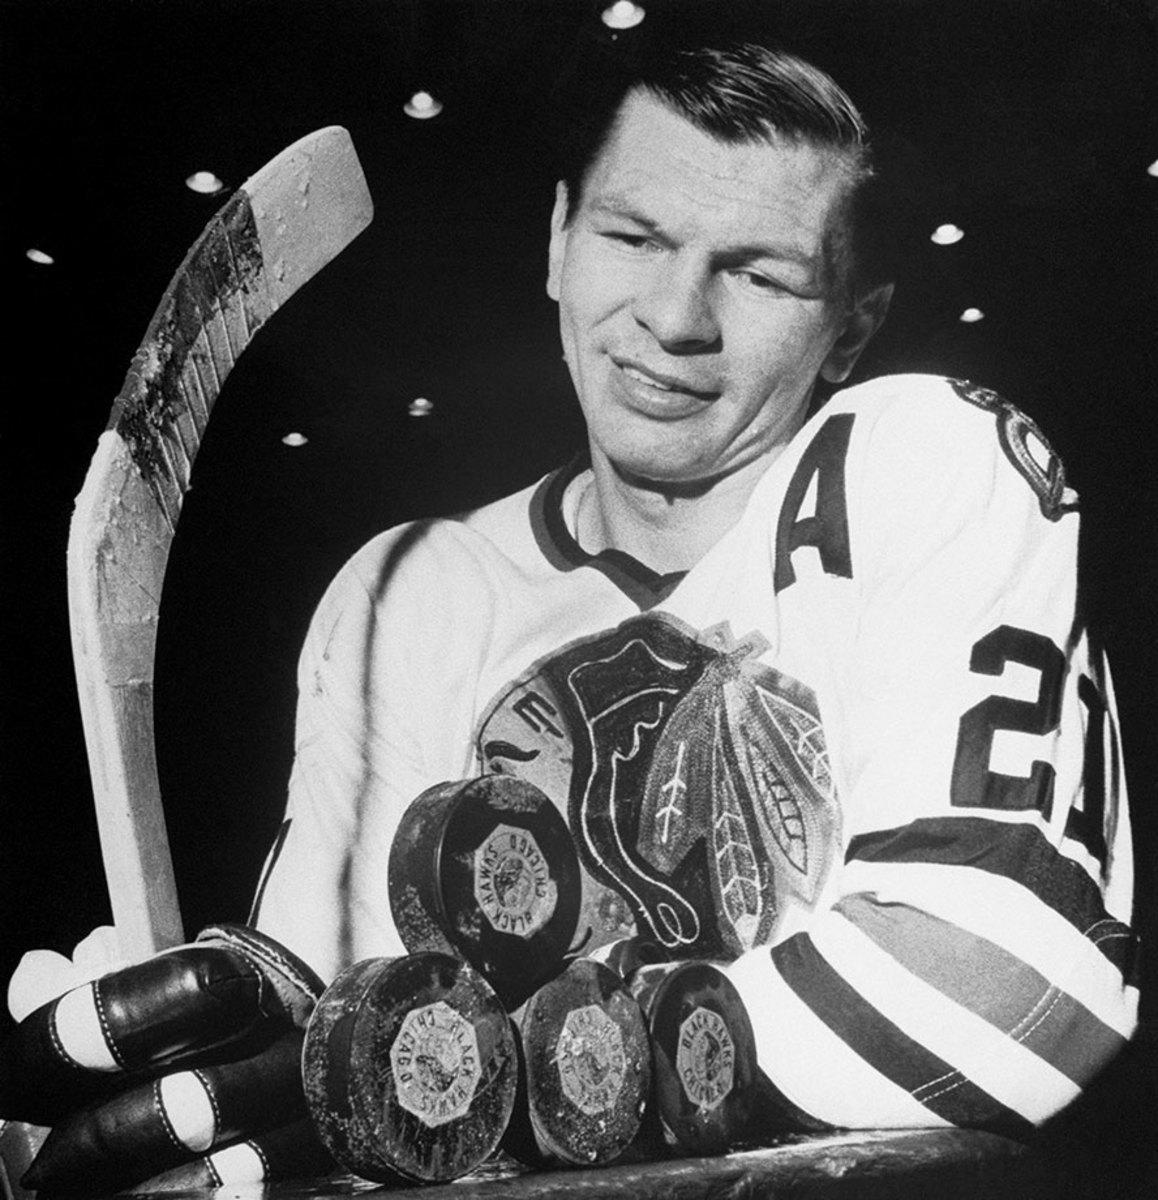 Stan Mikita Autographed Limited Edition Legends of Hockey Lithograph -  Detroit City Sports